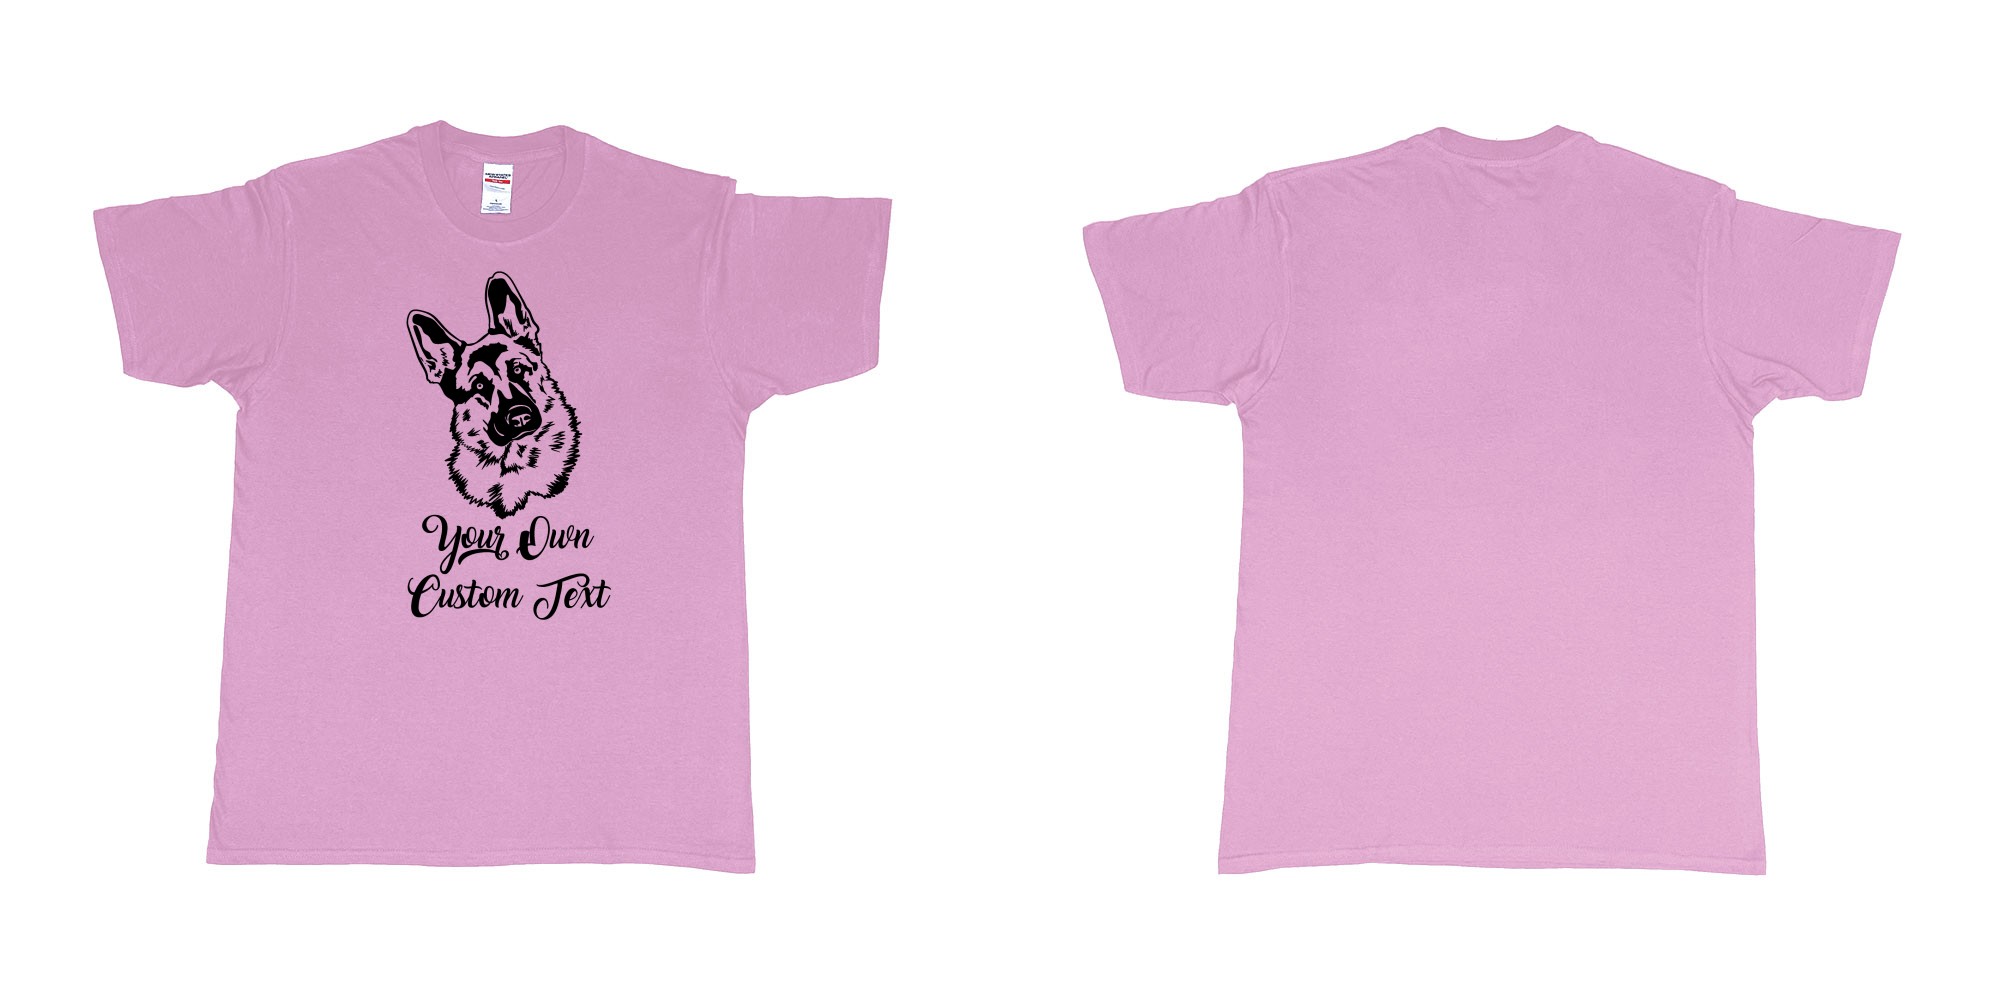 Custom tshirt design zack german shepherd tilts its head your own custom text in fabric color light-pink choice your own text made in Bali by The Pirate Way